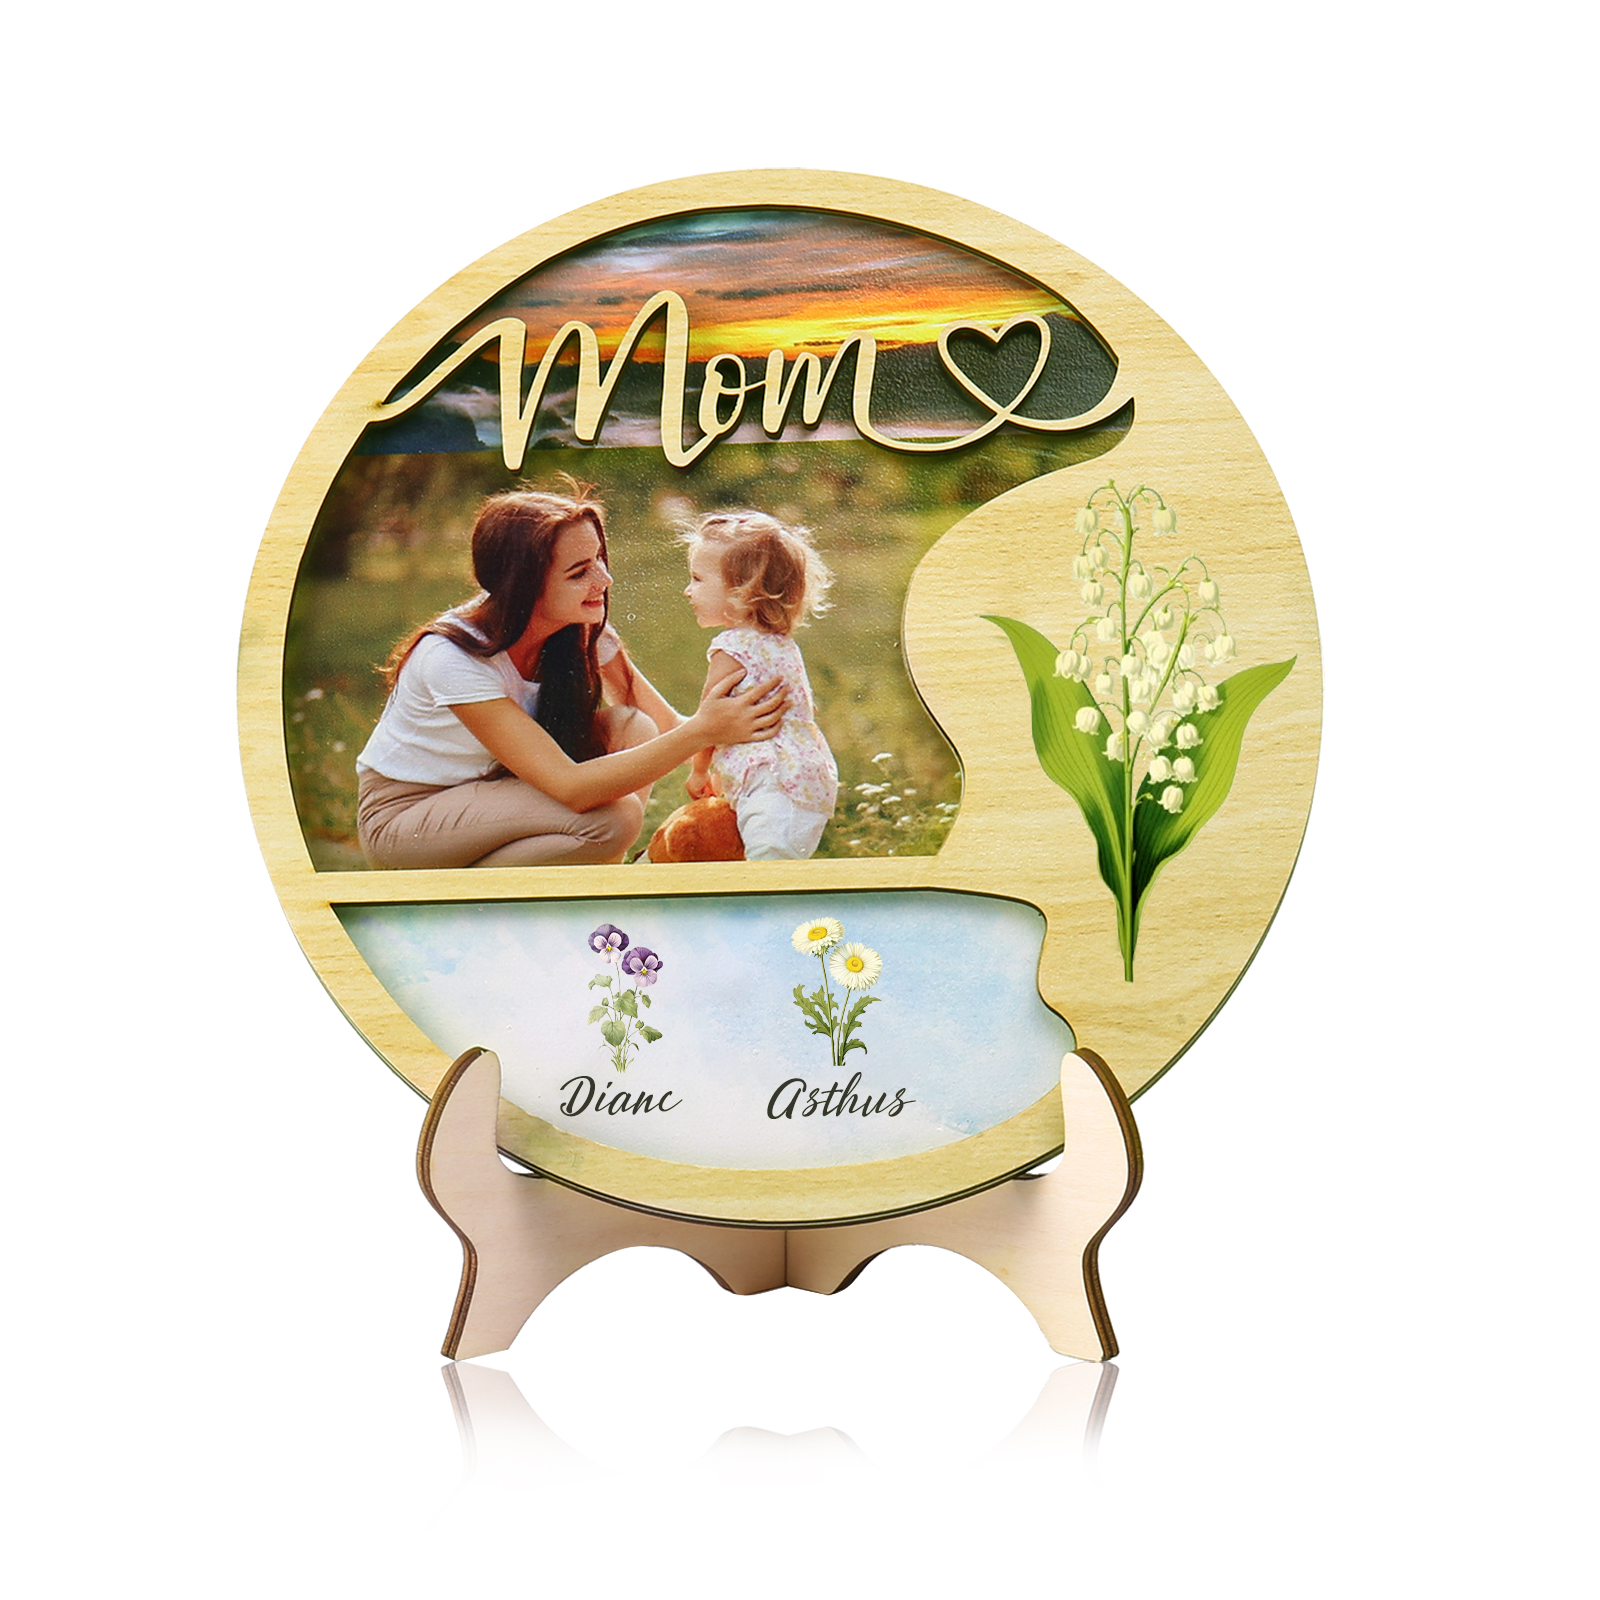 2 Names - Customized Photo Birth Flower Wooden Ornament Decoration for Mom